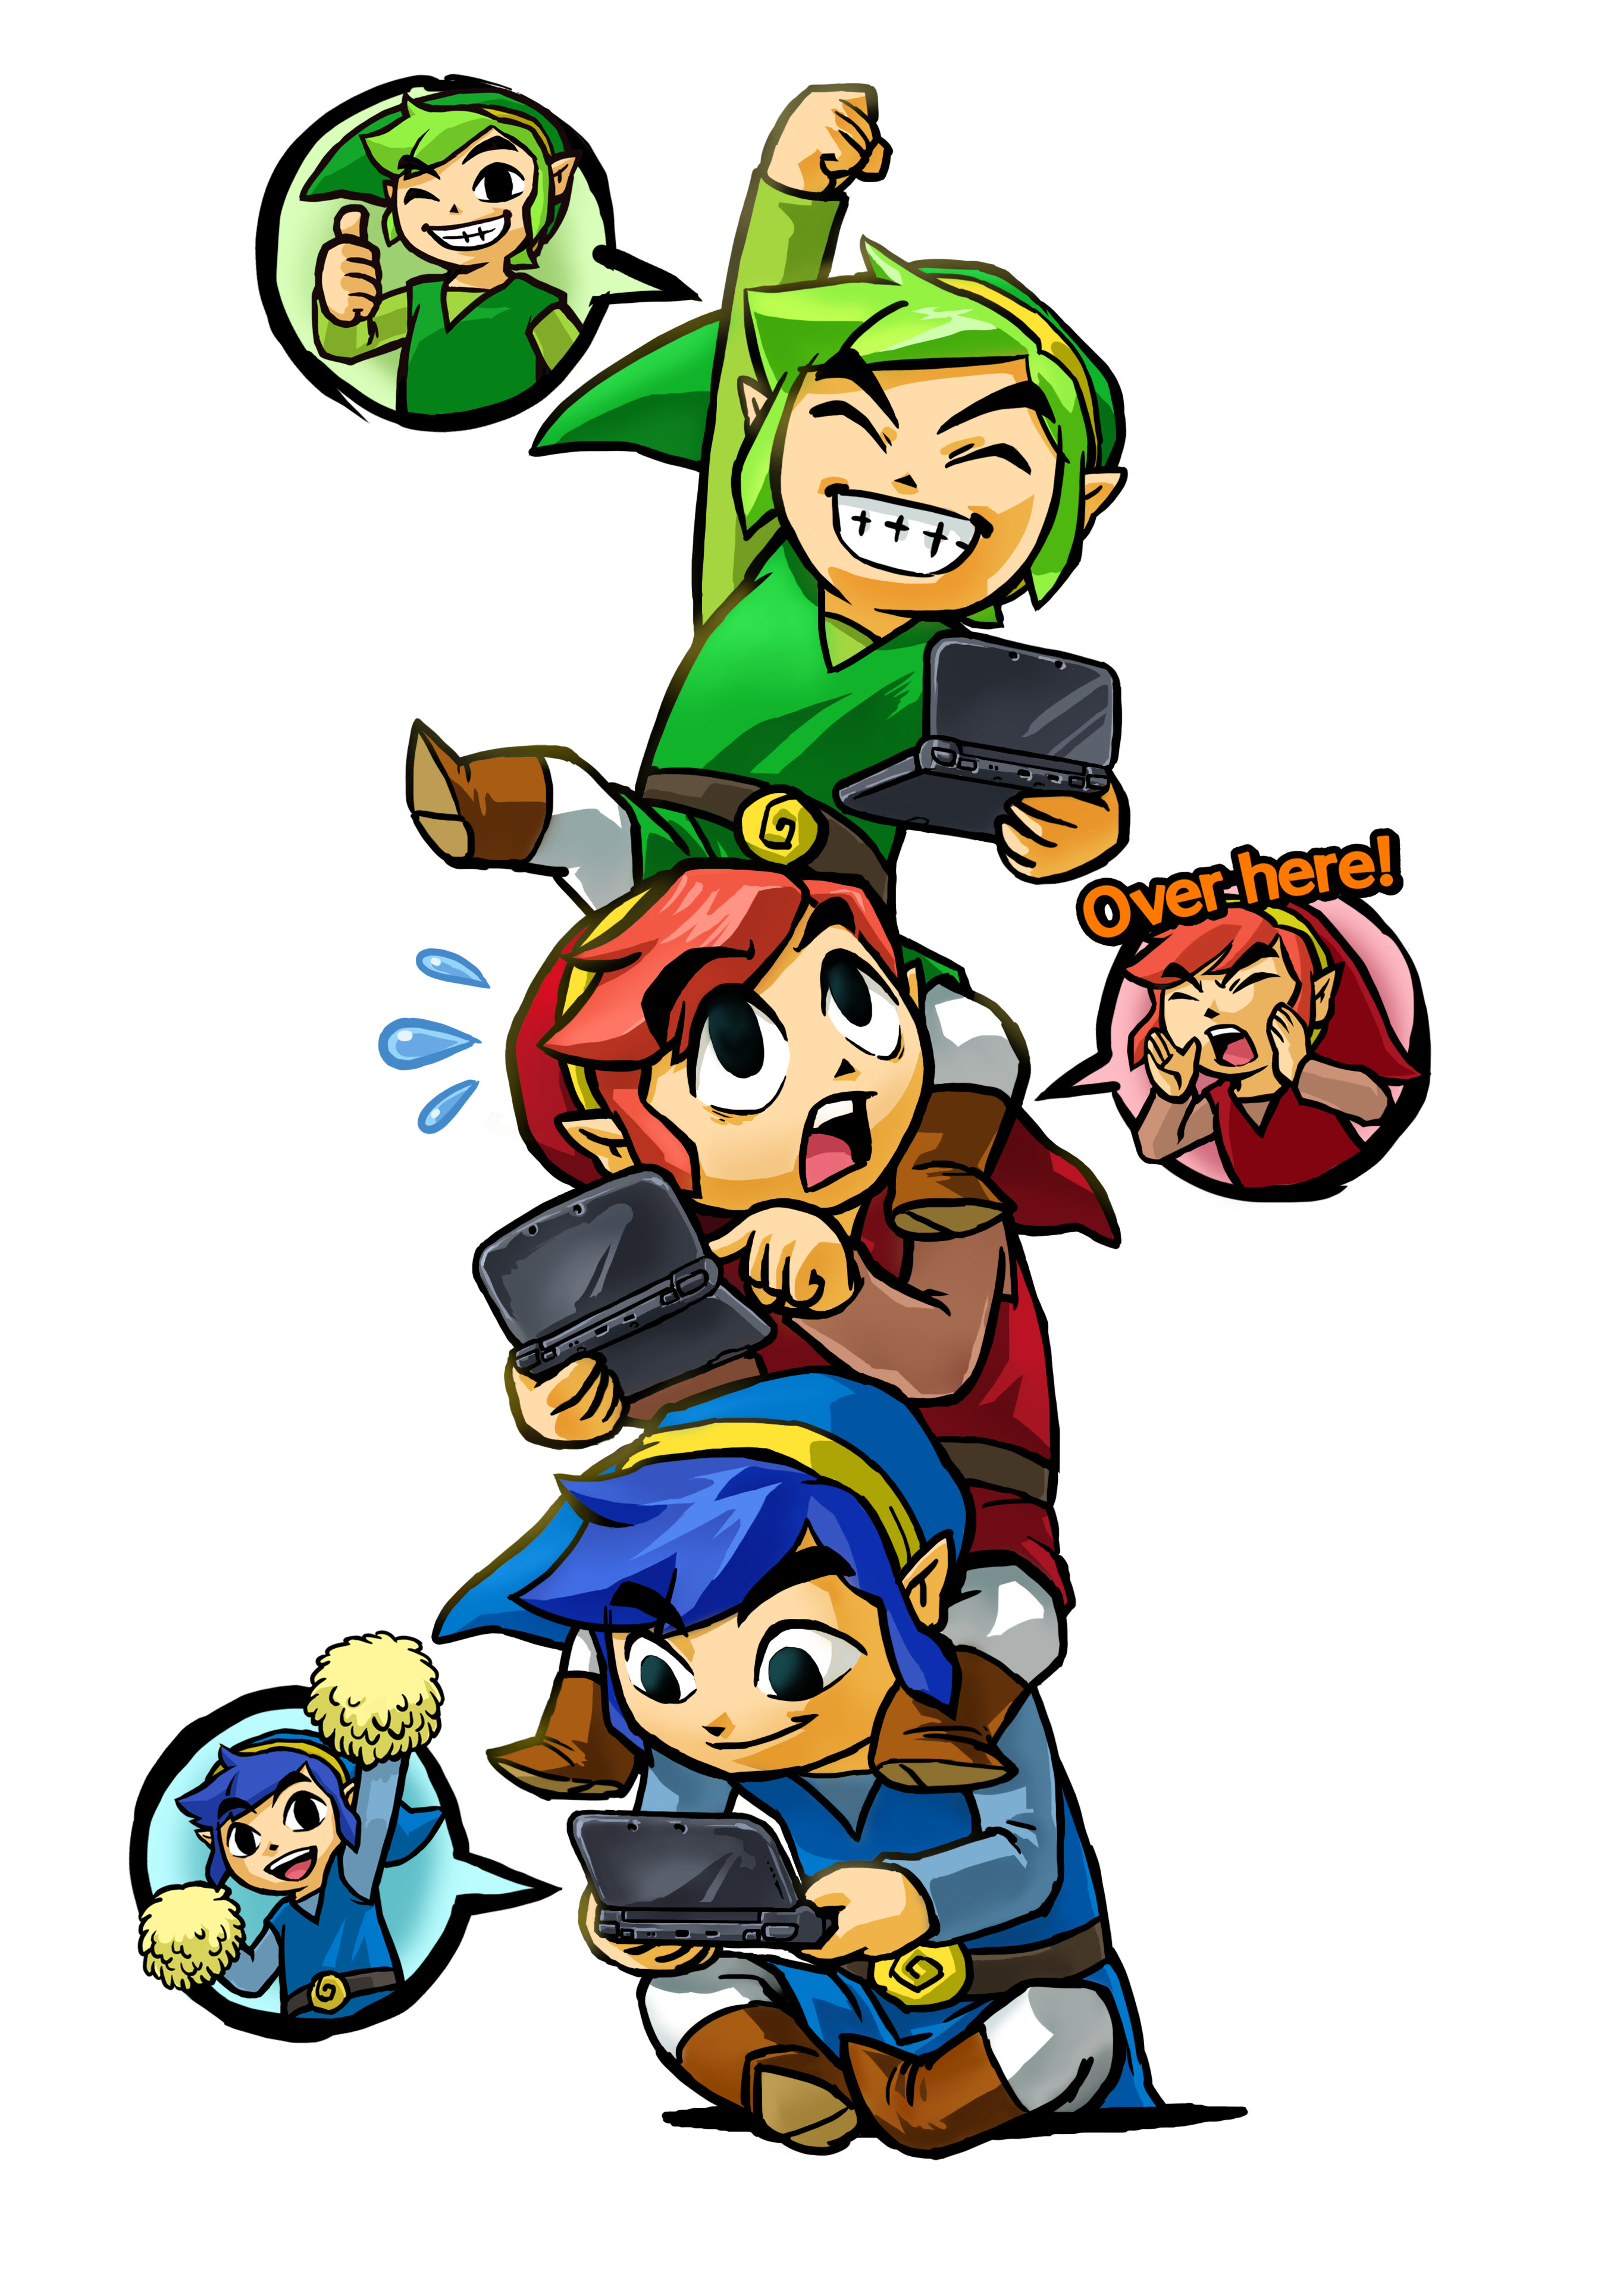 Wind Waker - Probably my favo